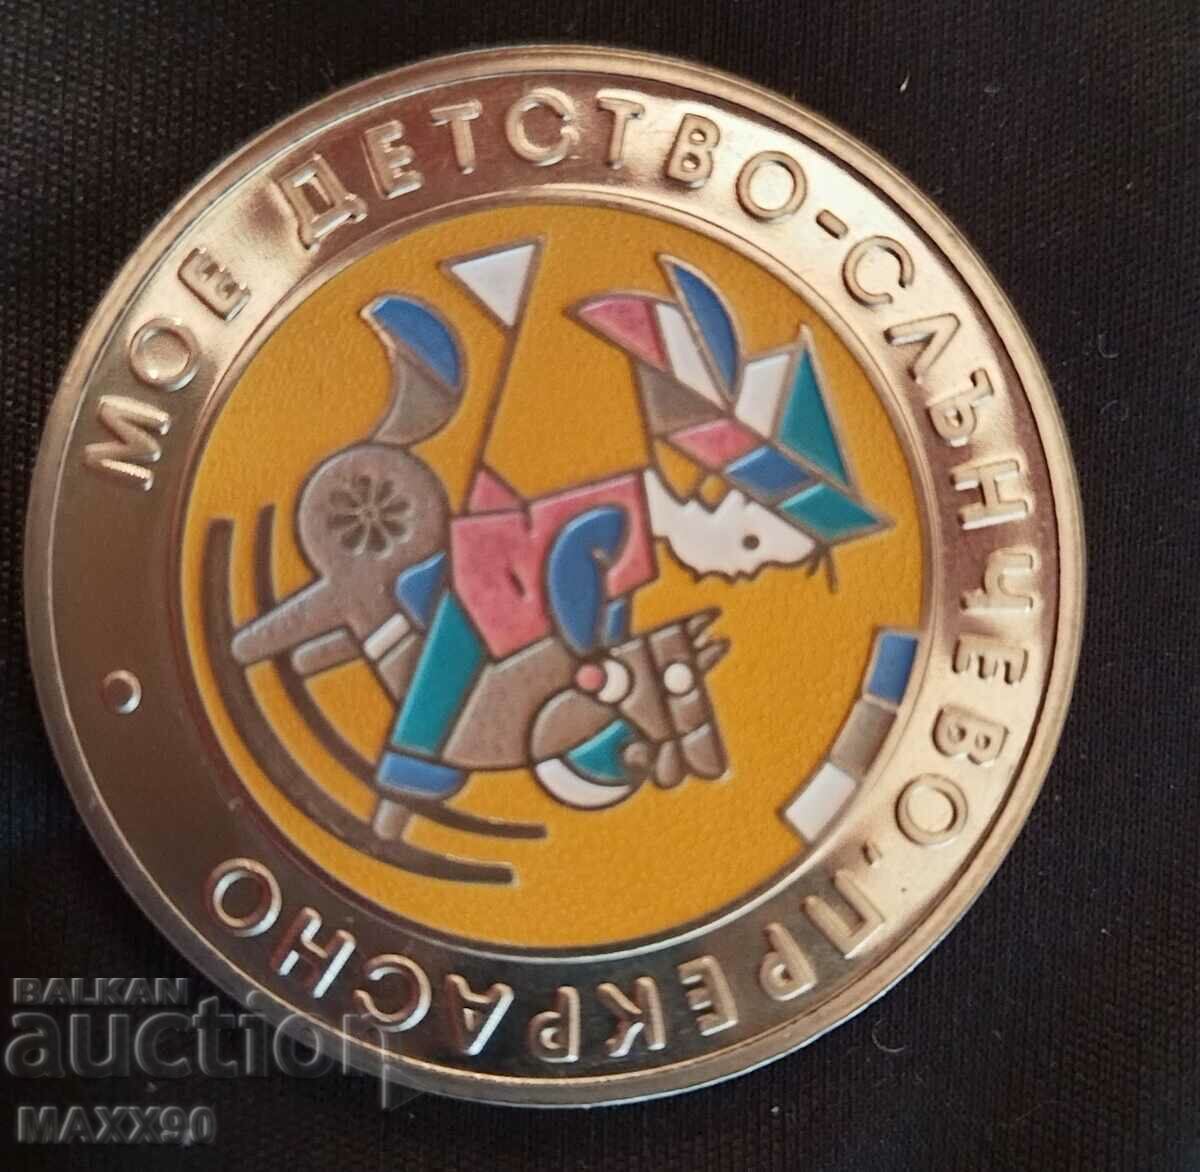 "My Childhood" coin with certificate